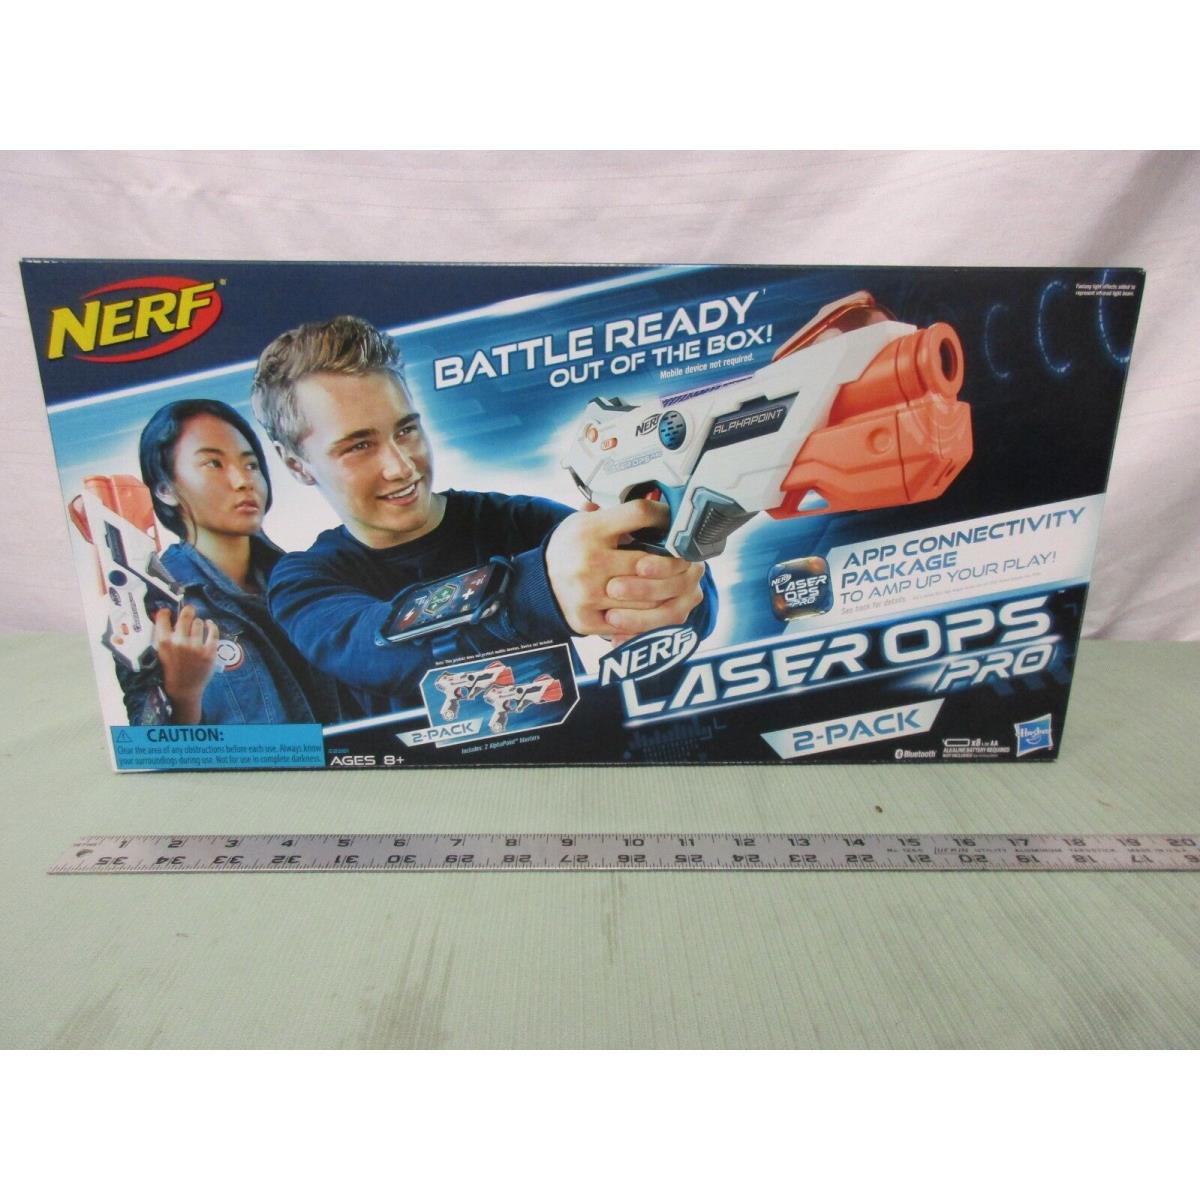 Nerf Laser Ops Pro 2 Pack Battle Ready Hasbro Bluetooth Compatible Guns Toy Fun